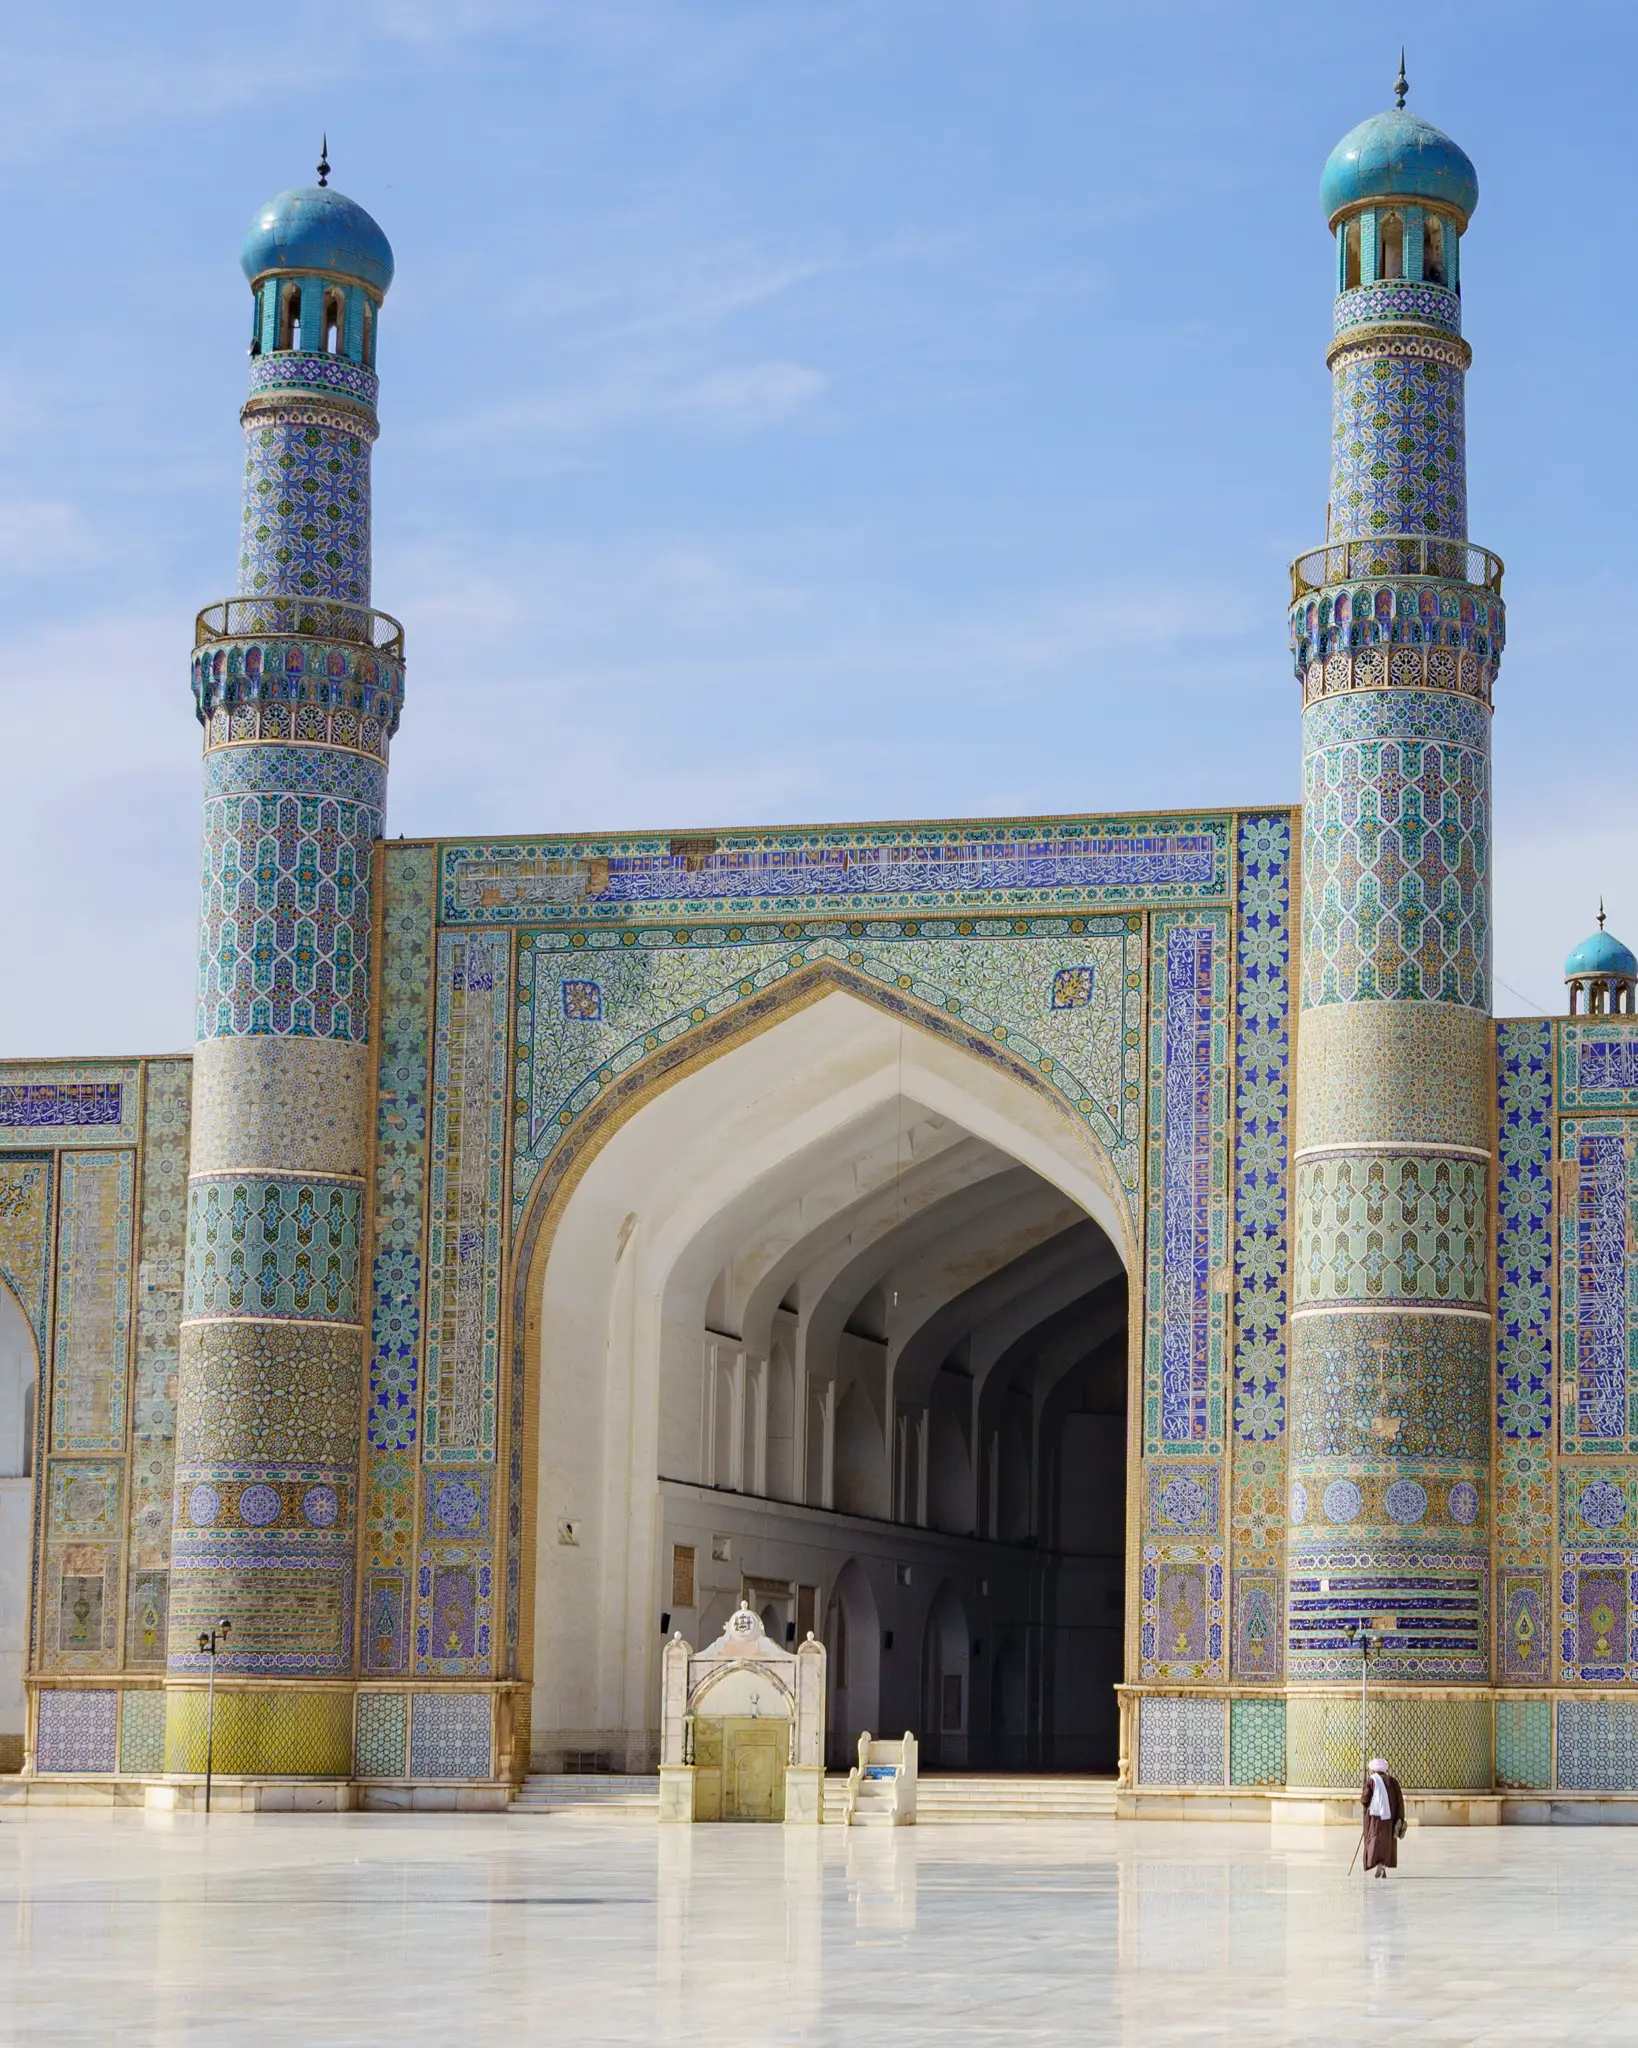 The stunning Great Mosque of Herat